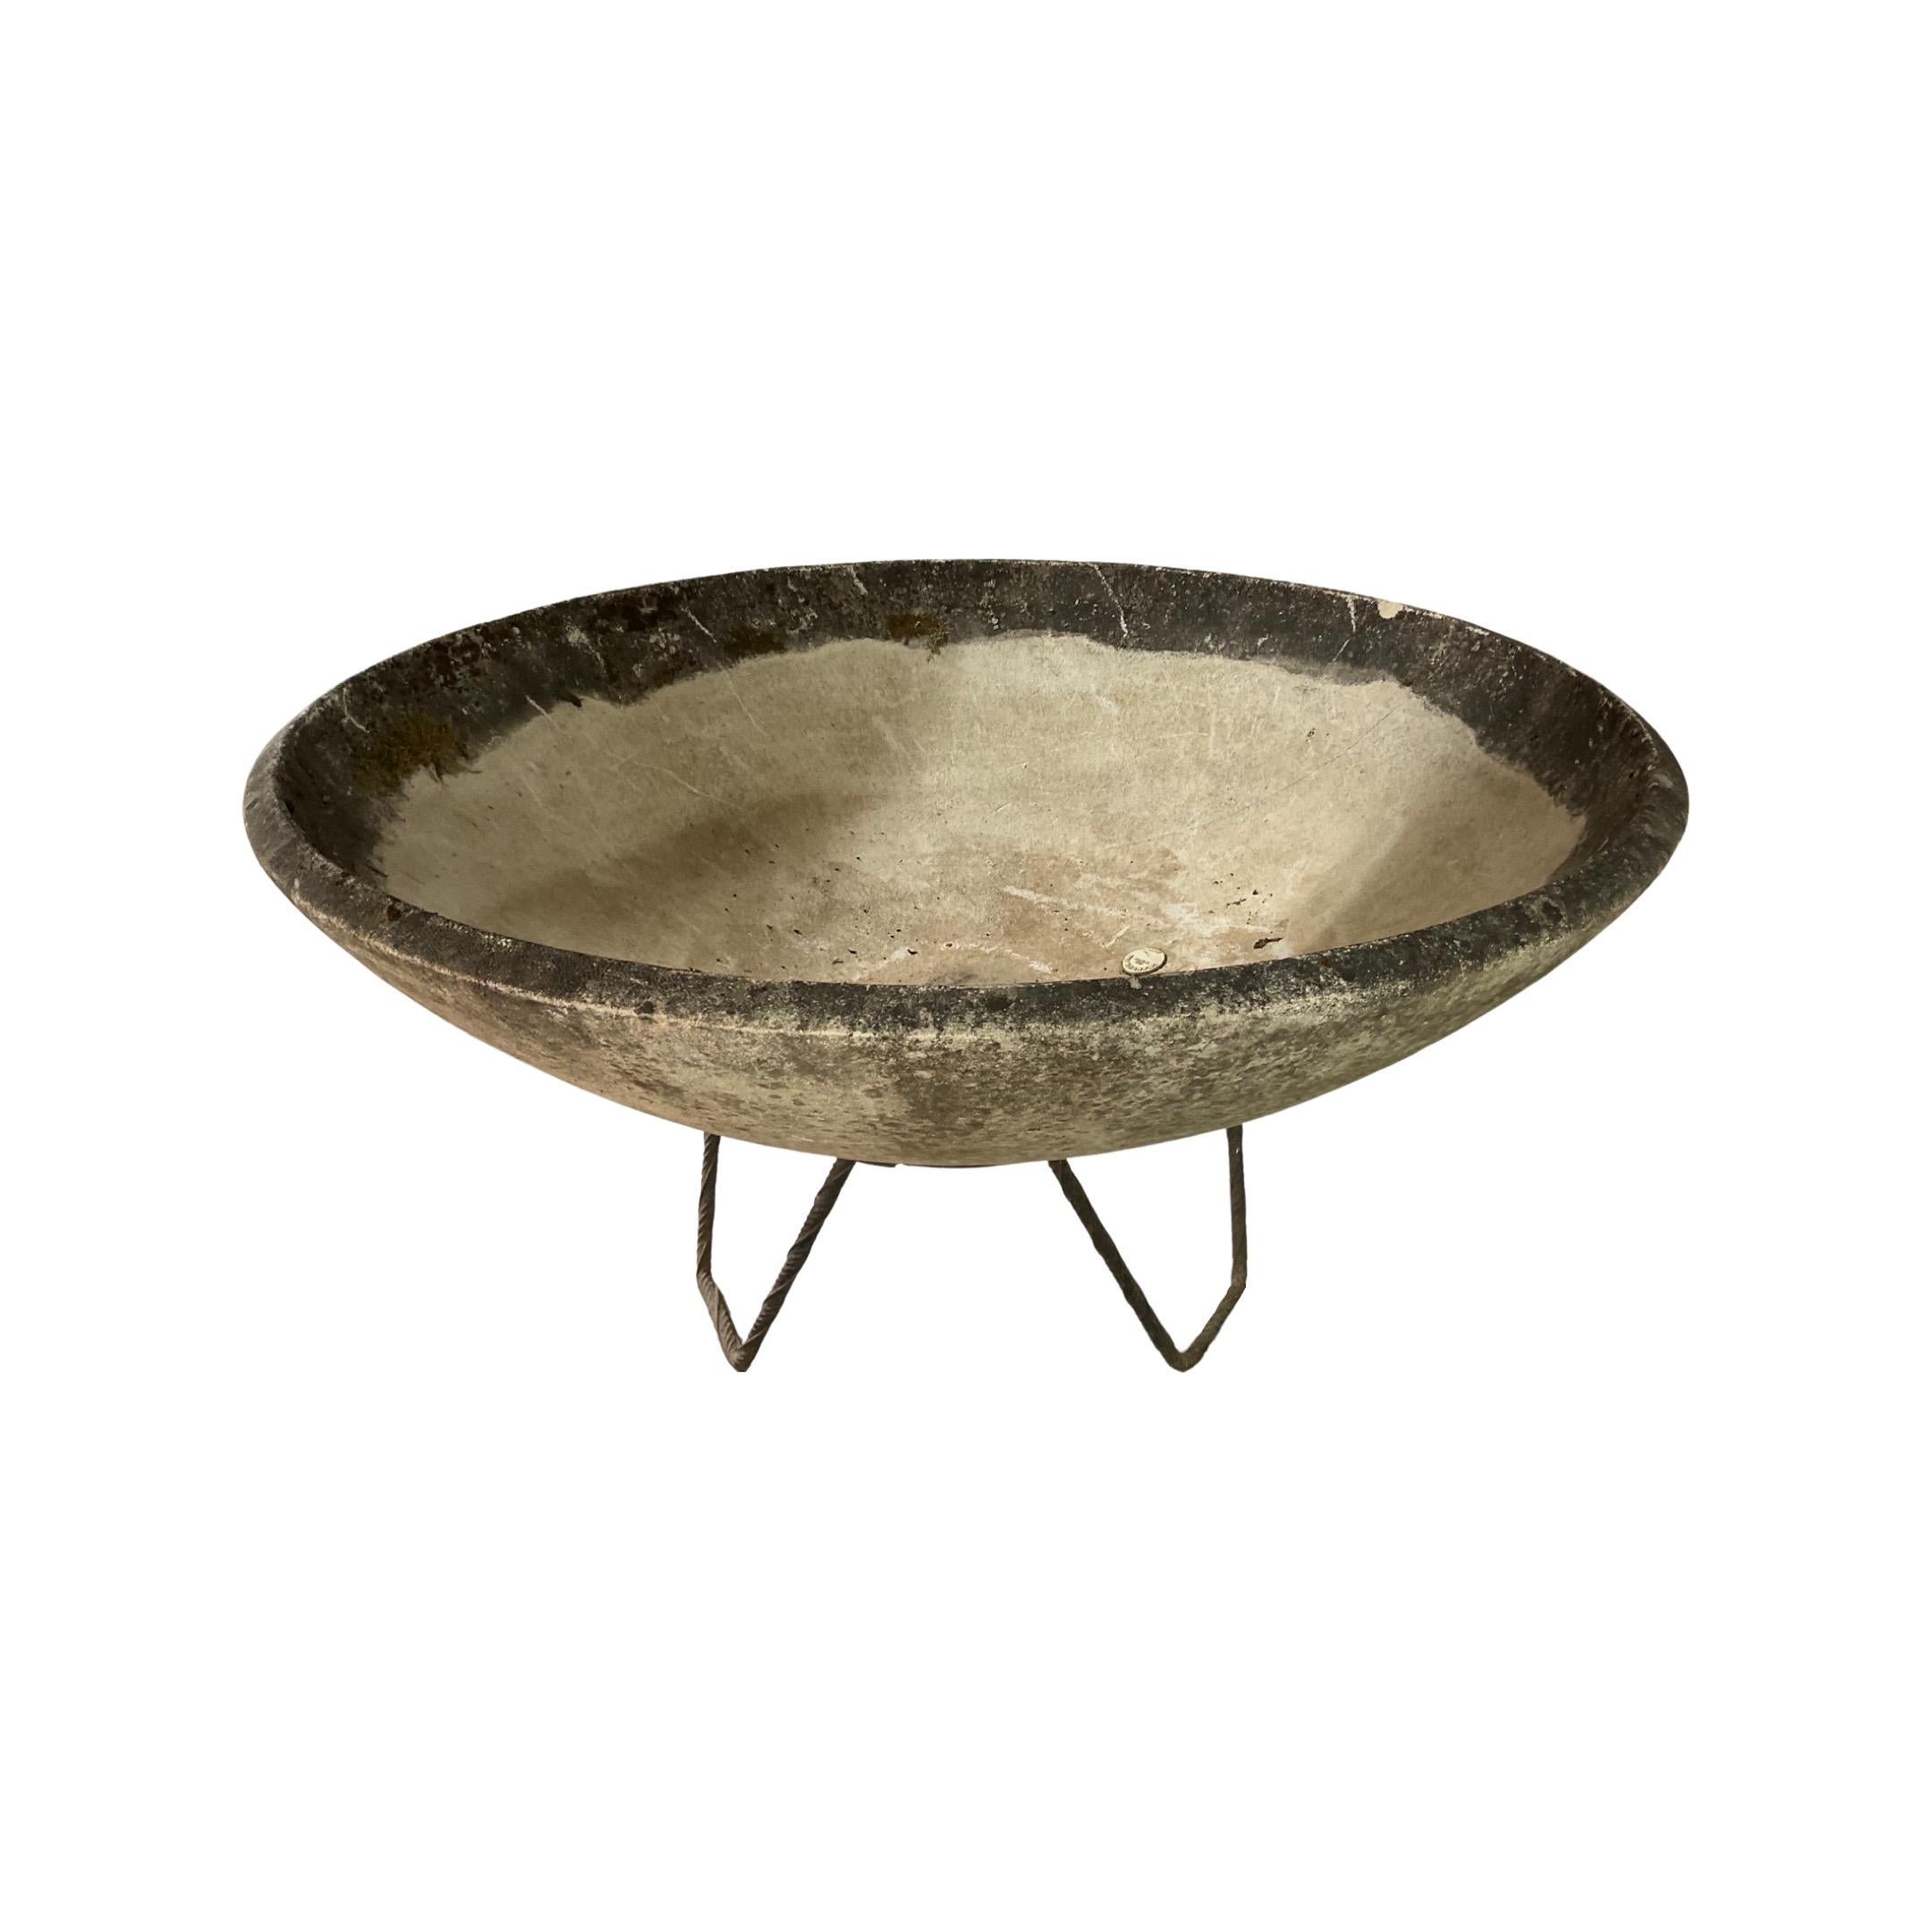 19th Century Swiss Saucer Planter by Willy Guhl For Sale